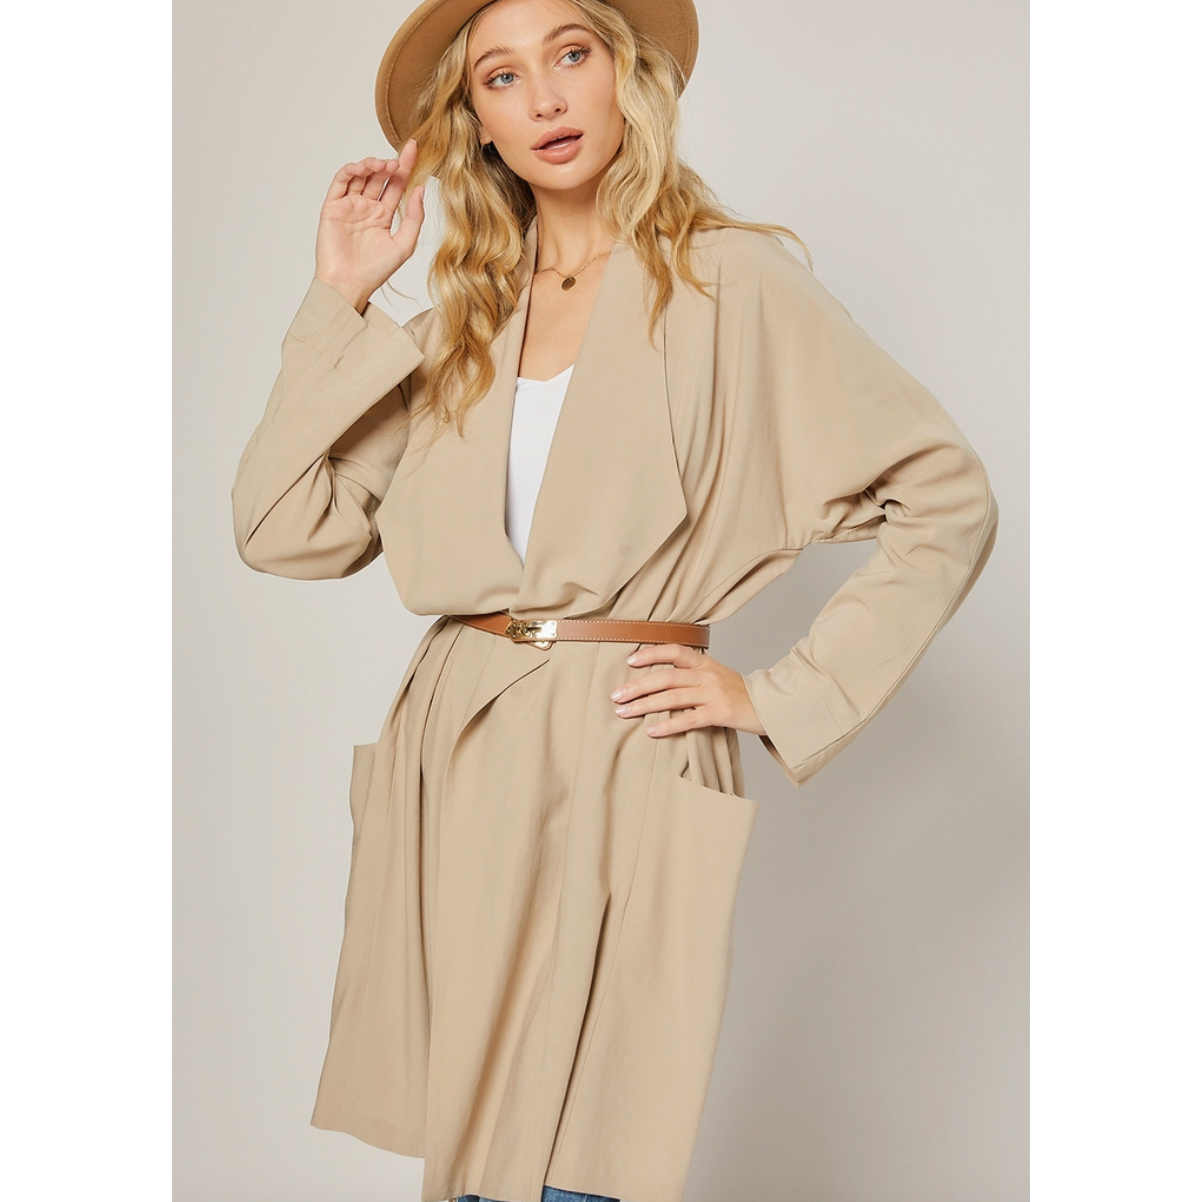 Tan Drape Front Duster Trench Coat